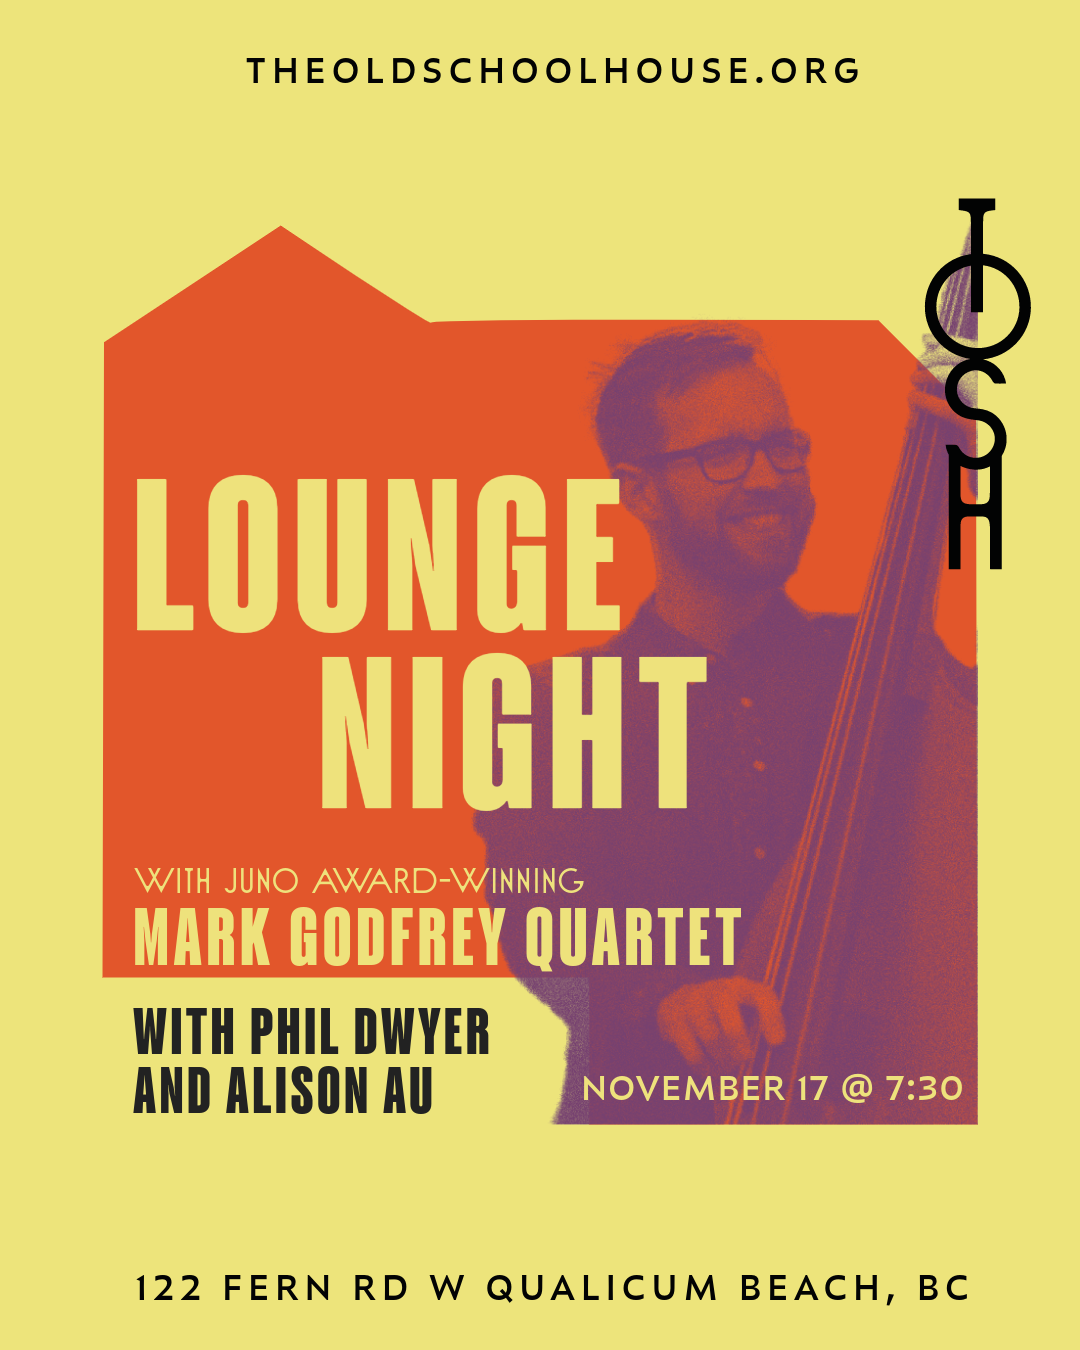 November 17, 2023 Lounge Night with Mark Godfrey Quartet Featuring Phil Dwyer and Allison Au